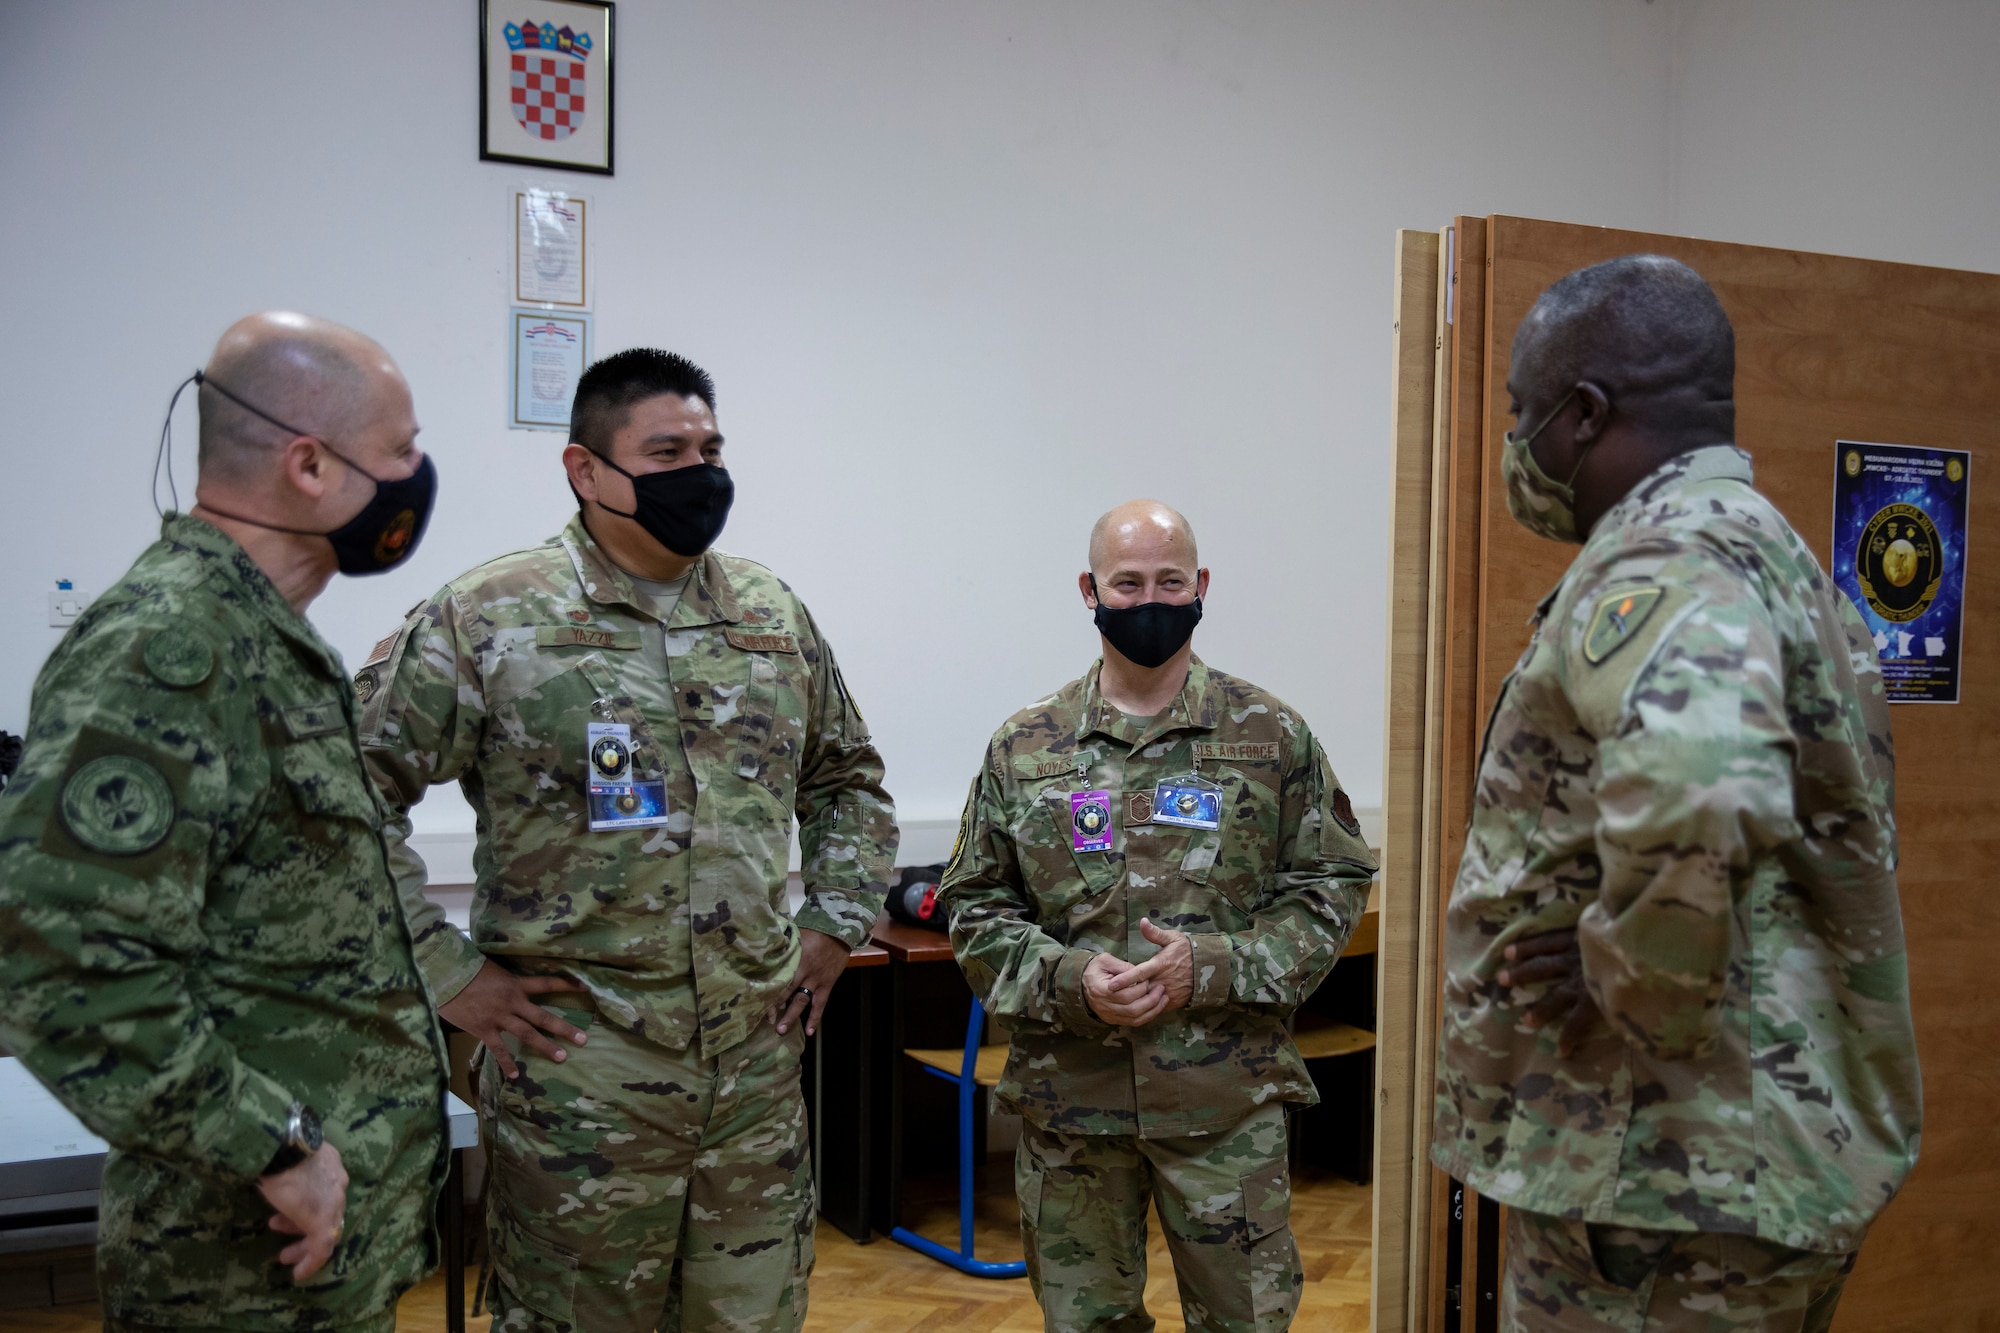 Members of the 168th Cyberspace Operations Group talk with Army National Guard and Kosovo Security Forces members during Exercise Adriatic Thunder in Croatia, June 9, 2021. The 168th COS currently hosts members of the Defense Cyber Operations Element during drills. (U.S. Army National Guard photos by Sgt. Samantha Hircock)